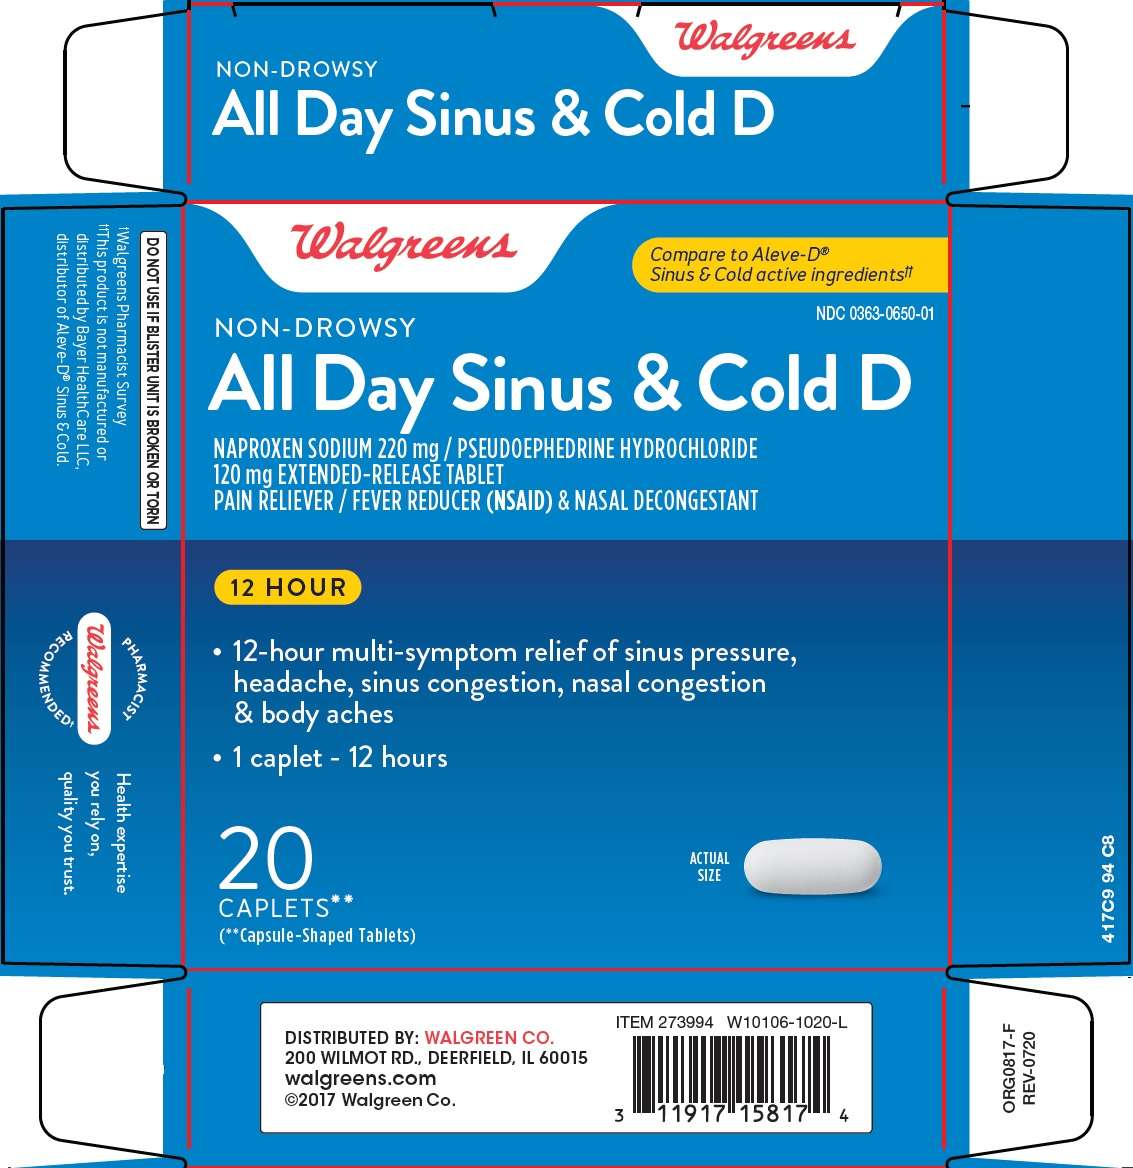 Walgreen Co. All Day Sinus &  Cold D Drug Facts